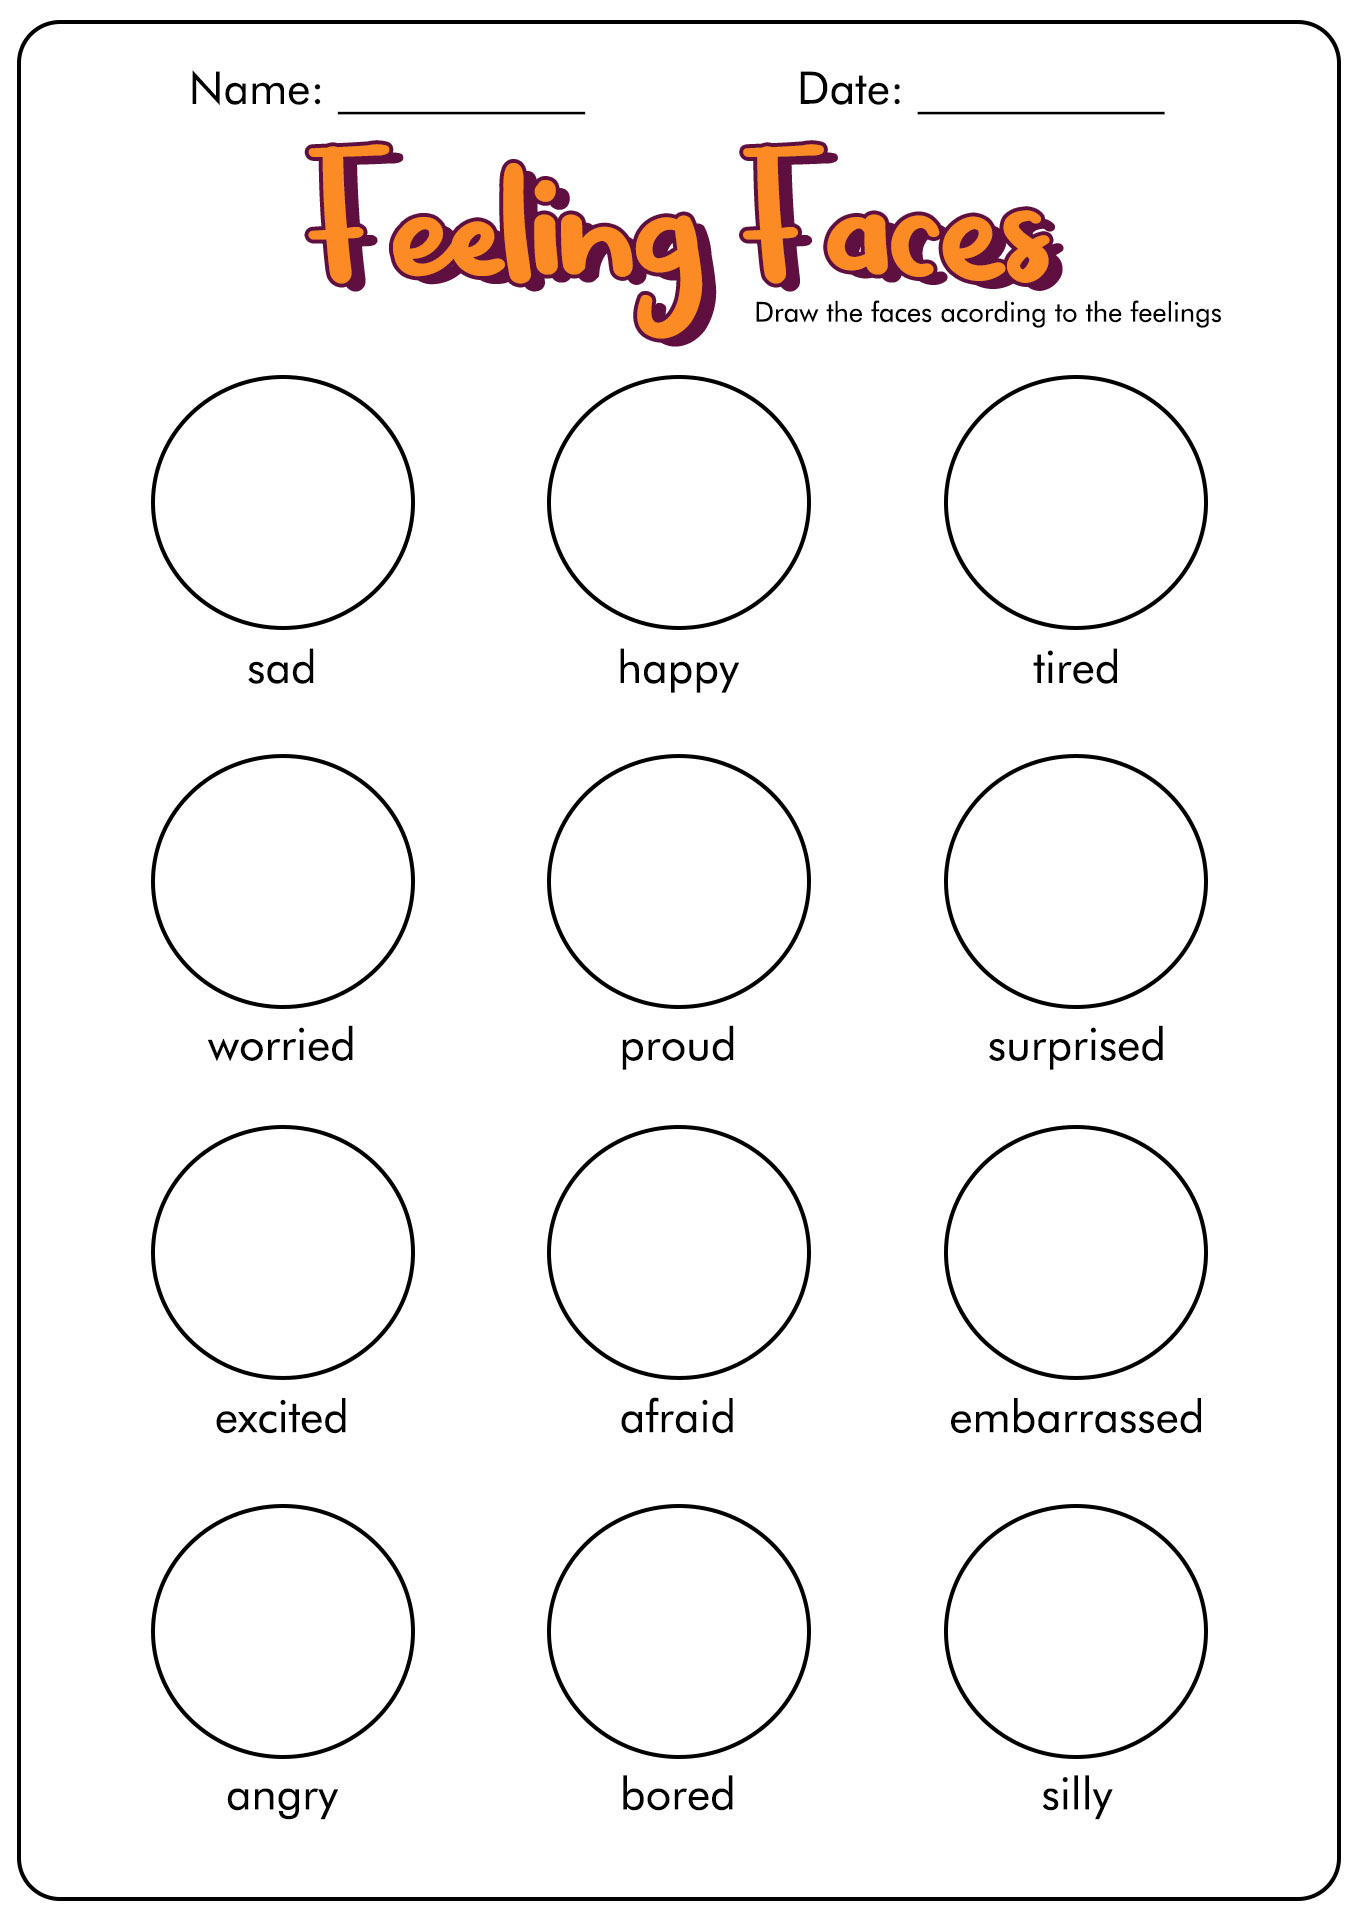 13-what-are-feelings-worksheets-free-pdf-at-worksheeto